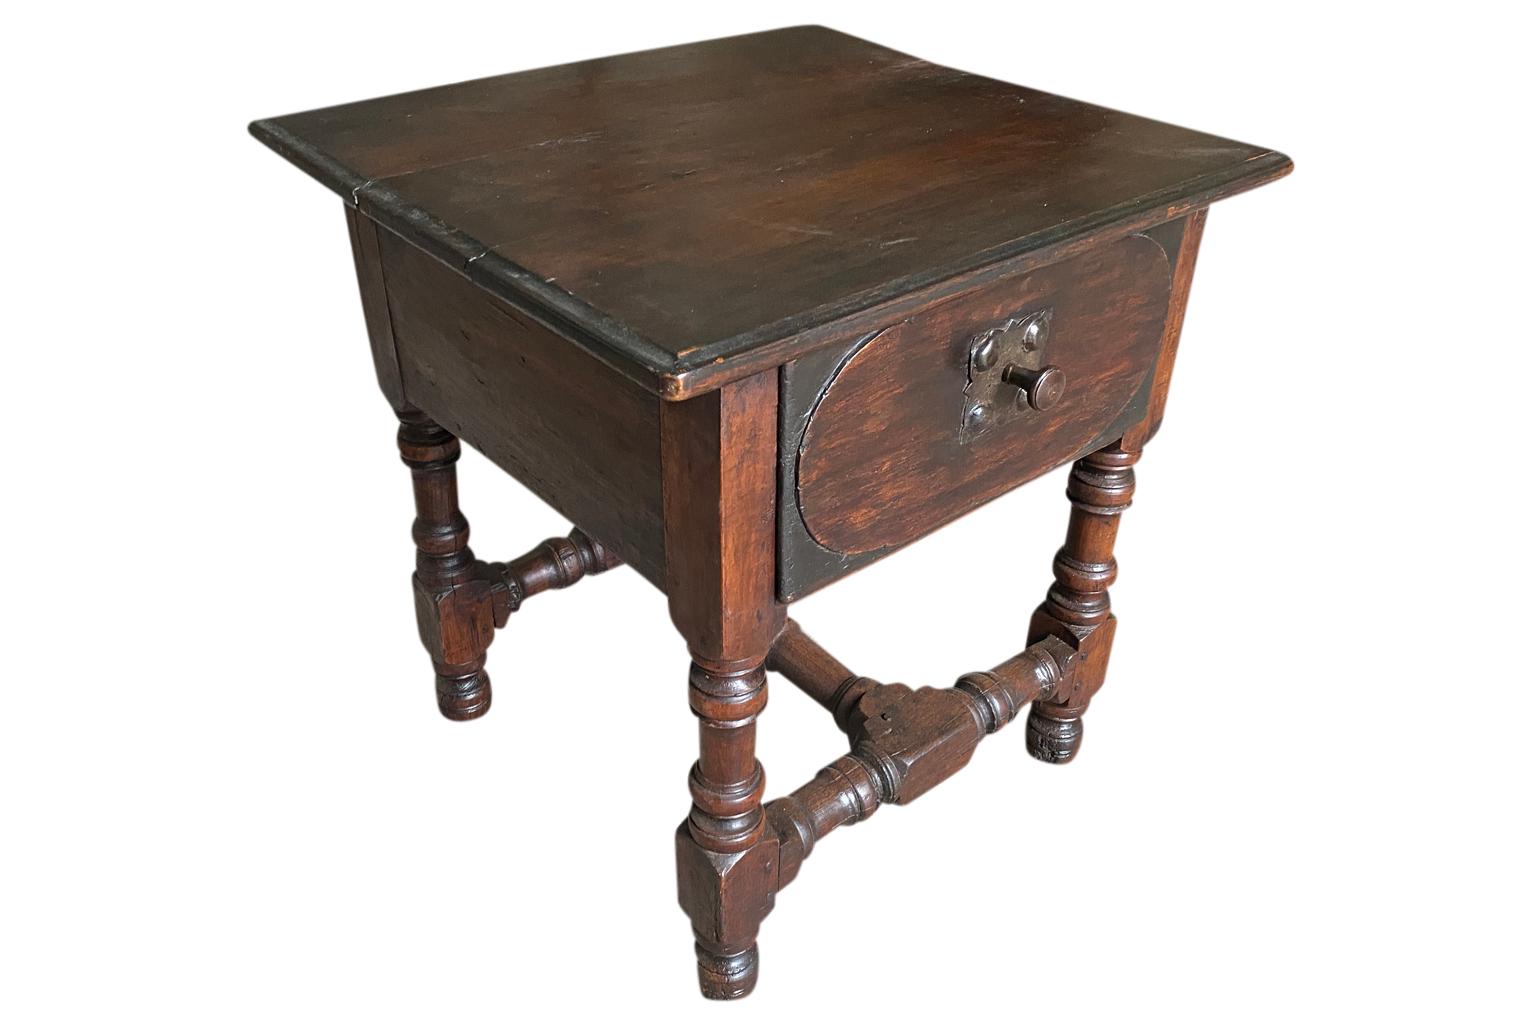 A very charming 18th century Arte Populaire side tale from the Ardeche region of France. Soundly constructed from beautiful walnut and oak with a single drawer and nicely turned legs.